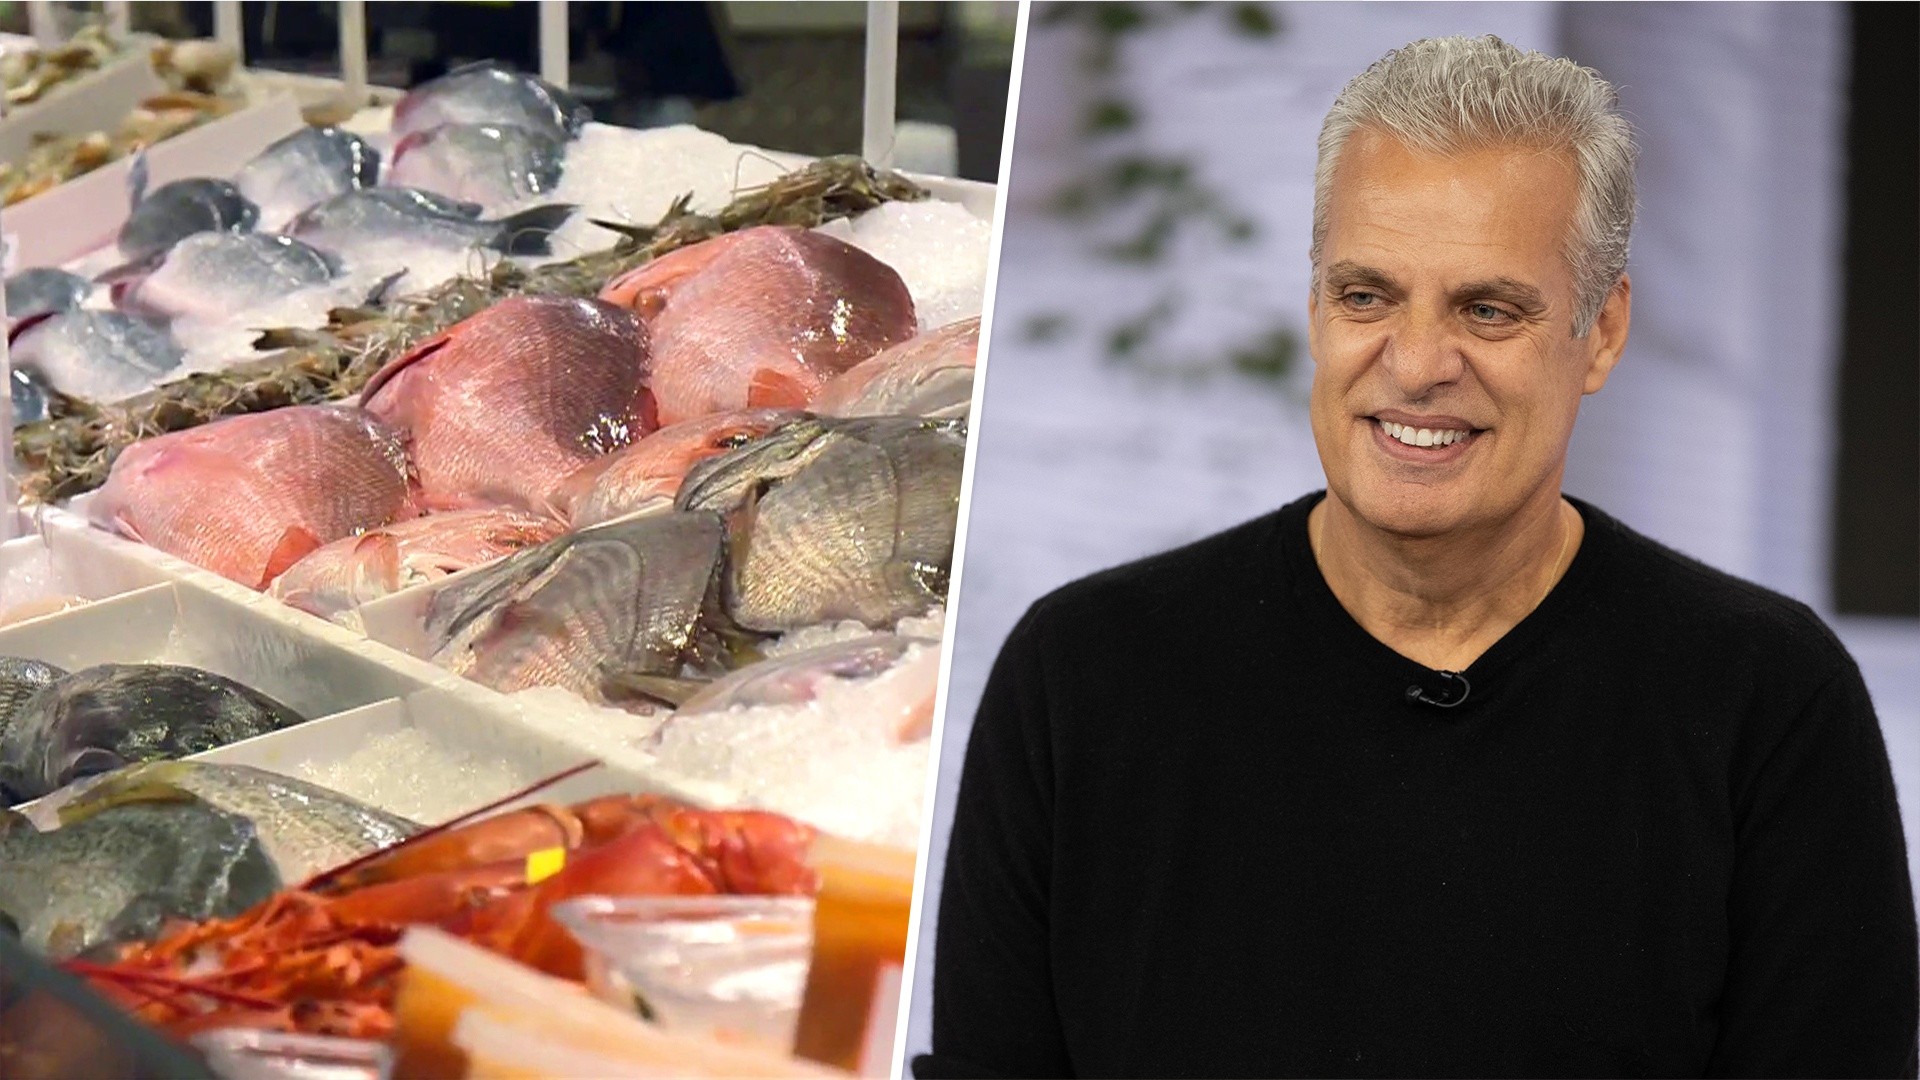 How to buy, store and prep fresh fish: Chef Éric Ripert shares tips